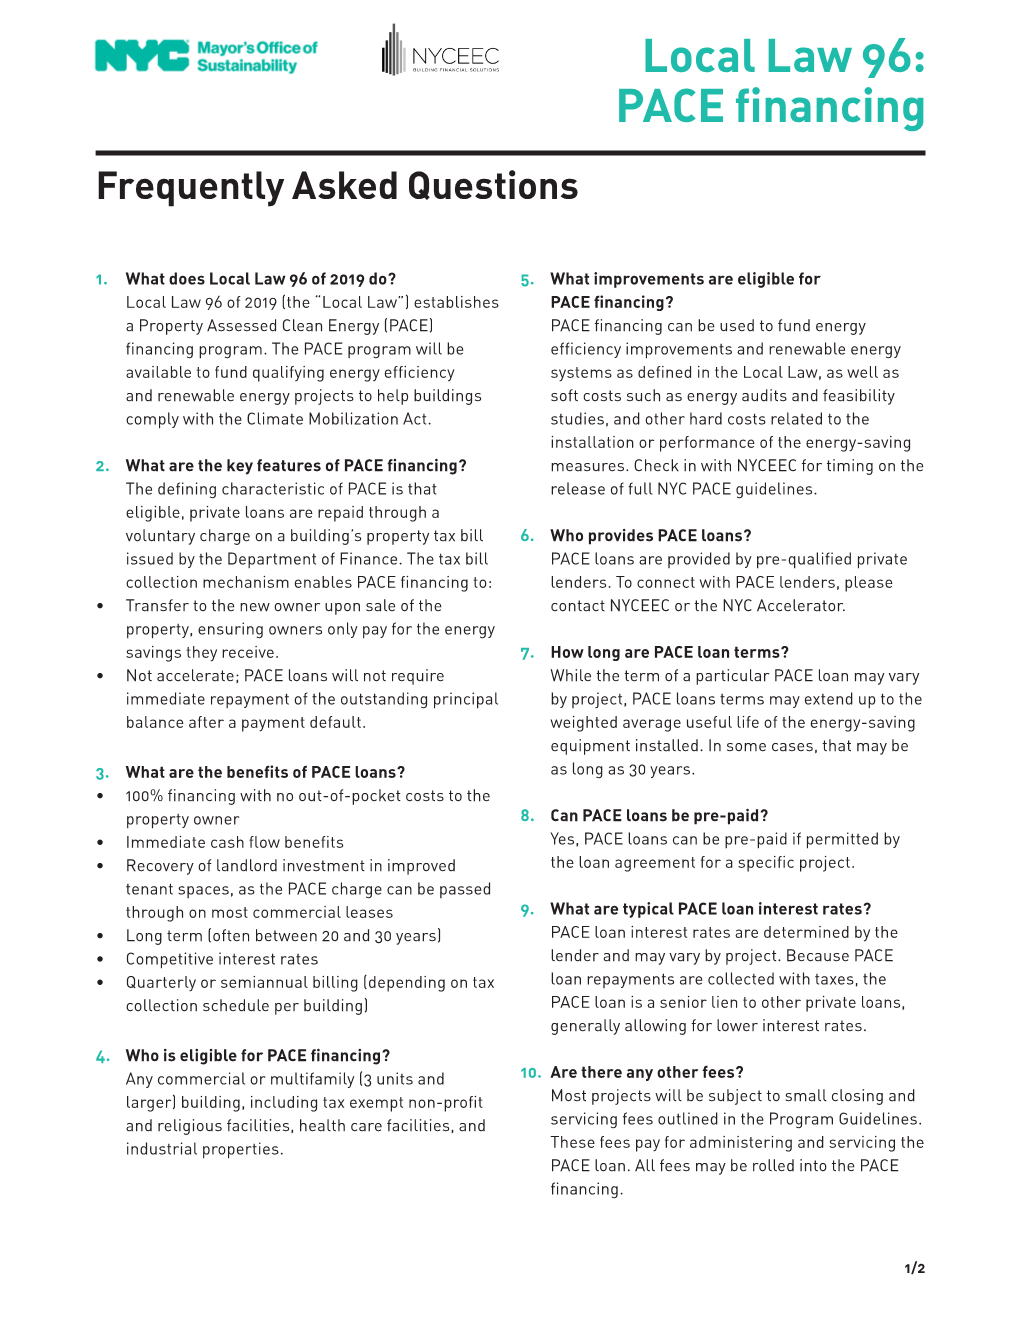 PACE Financing Frequently Asked Questions